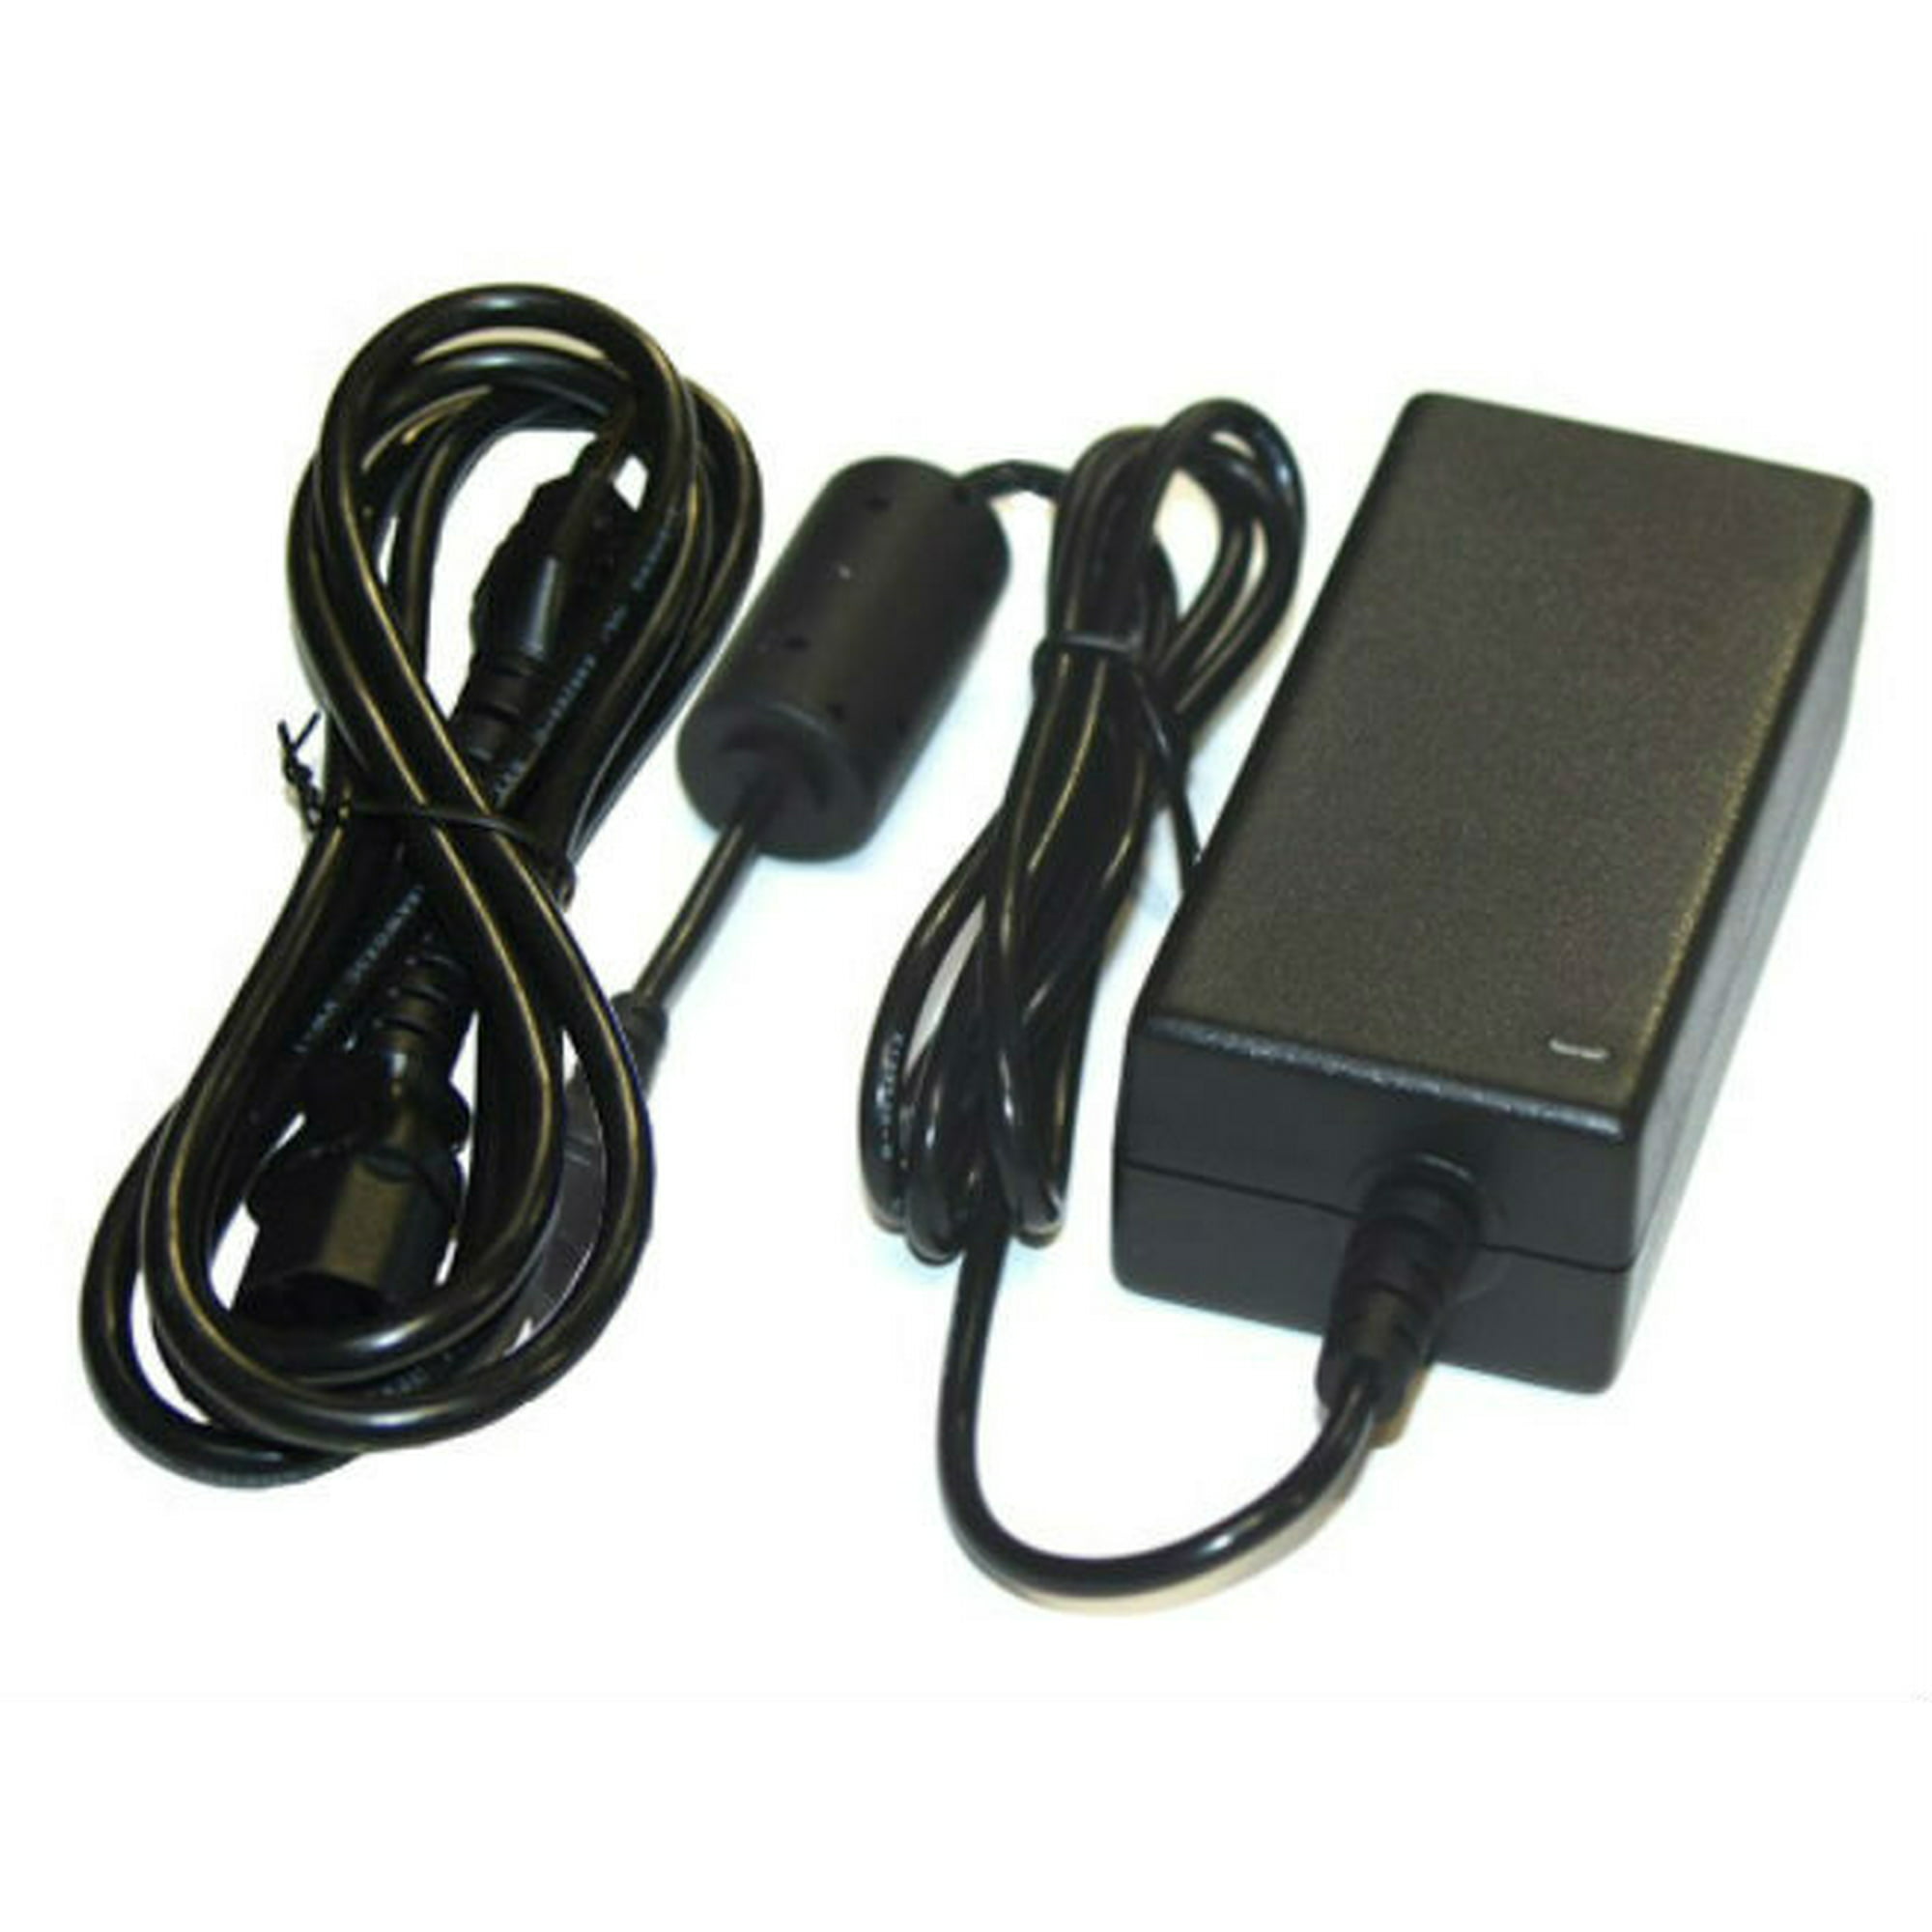 lenovo thinkpad tablet charger